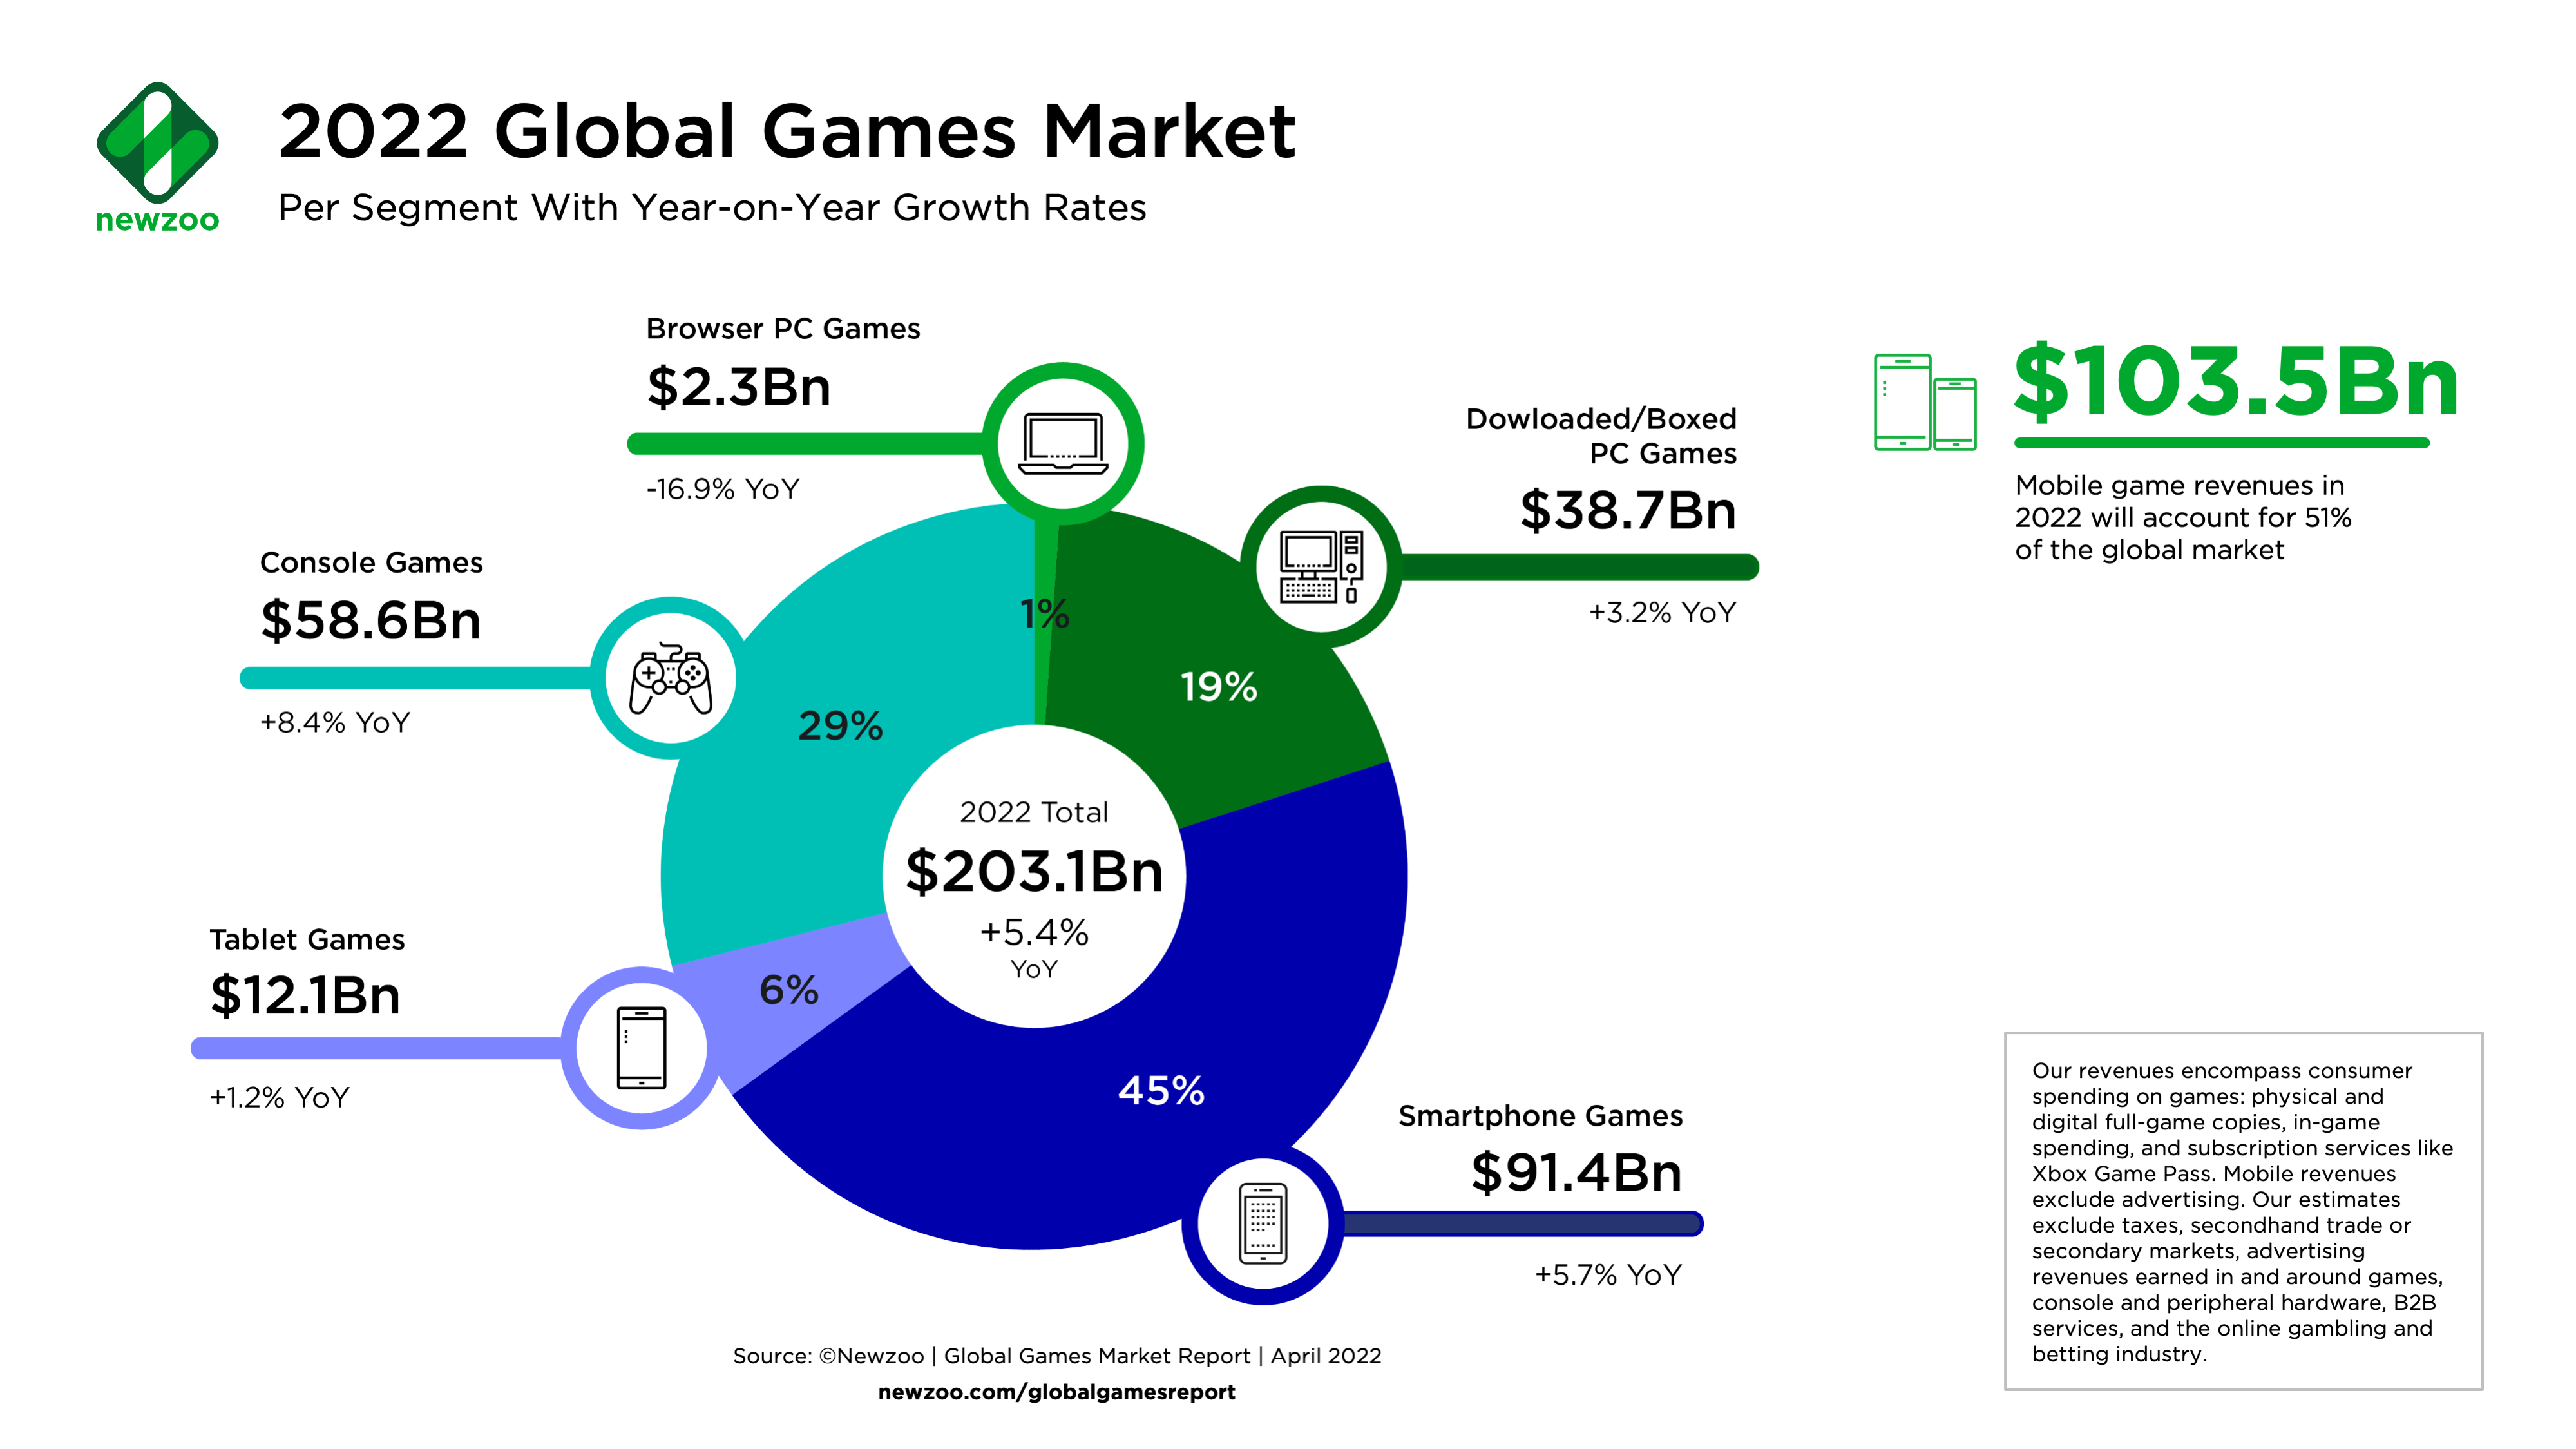 Online Gaming: The Rise of a Multi-Billion Dollar Industry